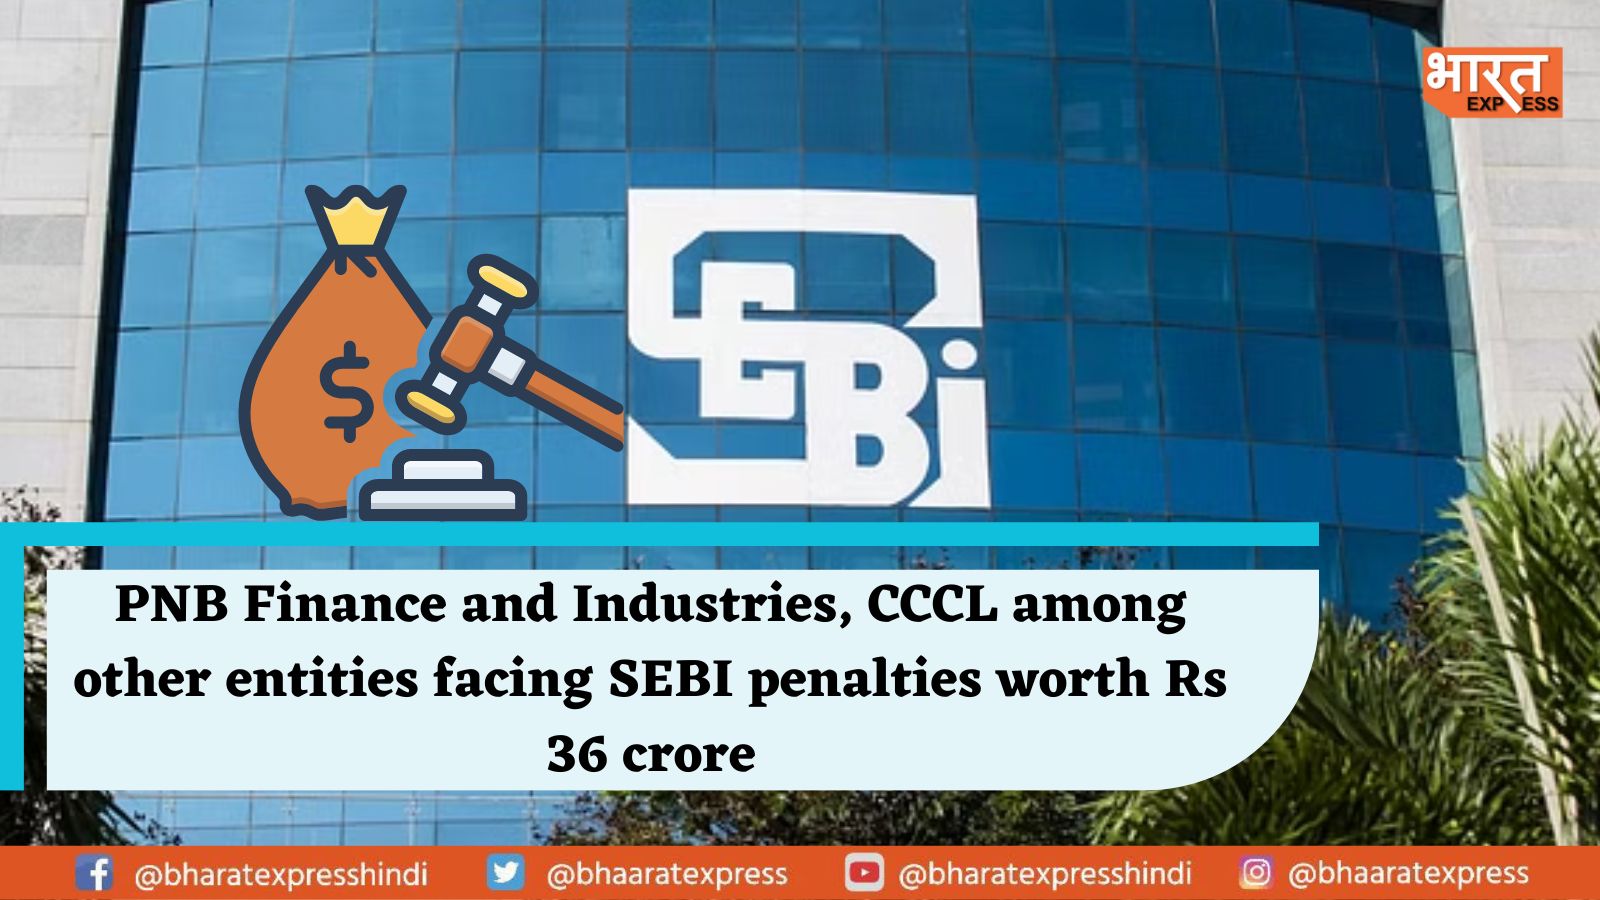 SEBI Imposes Penalties on PNB Finance and Industries, CCCL, and others worth Rs. 36 Crore